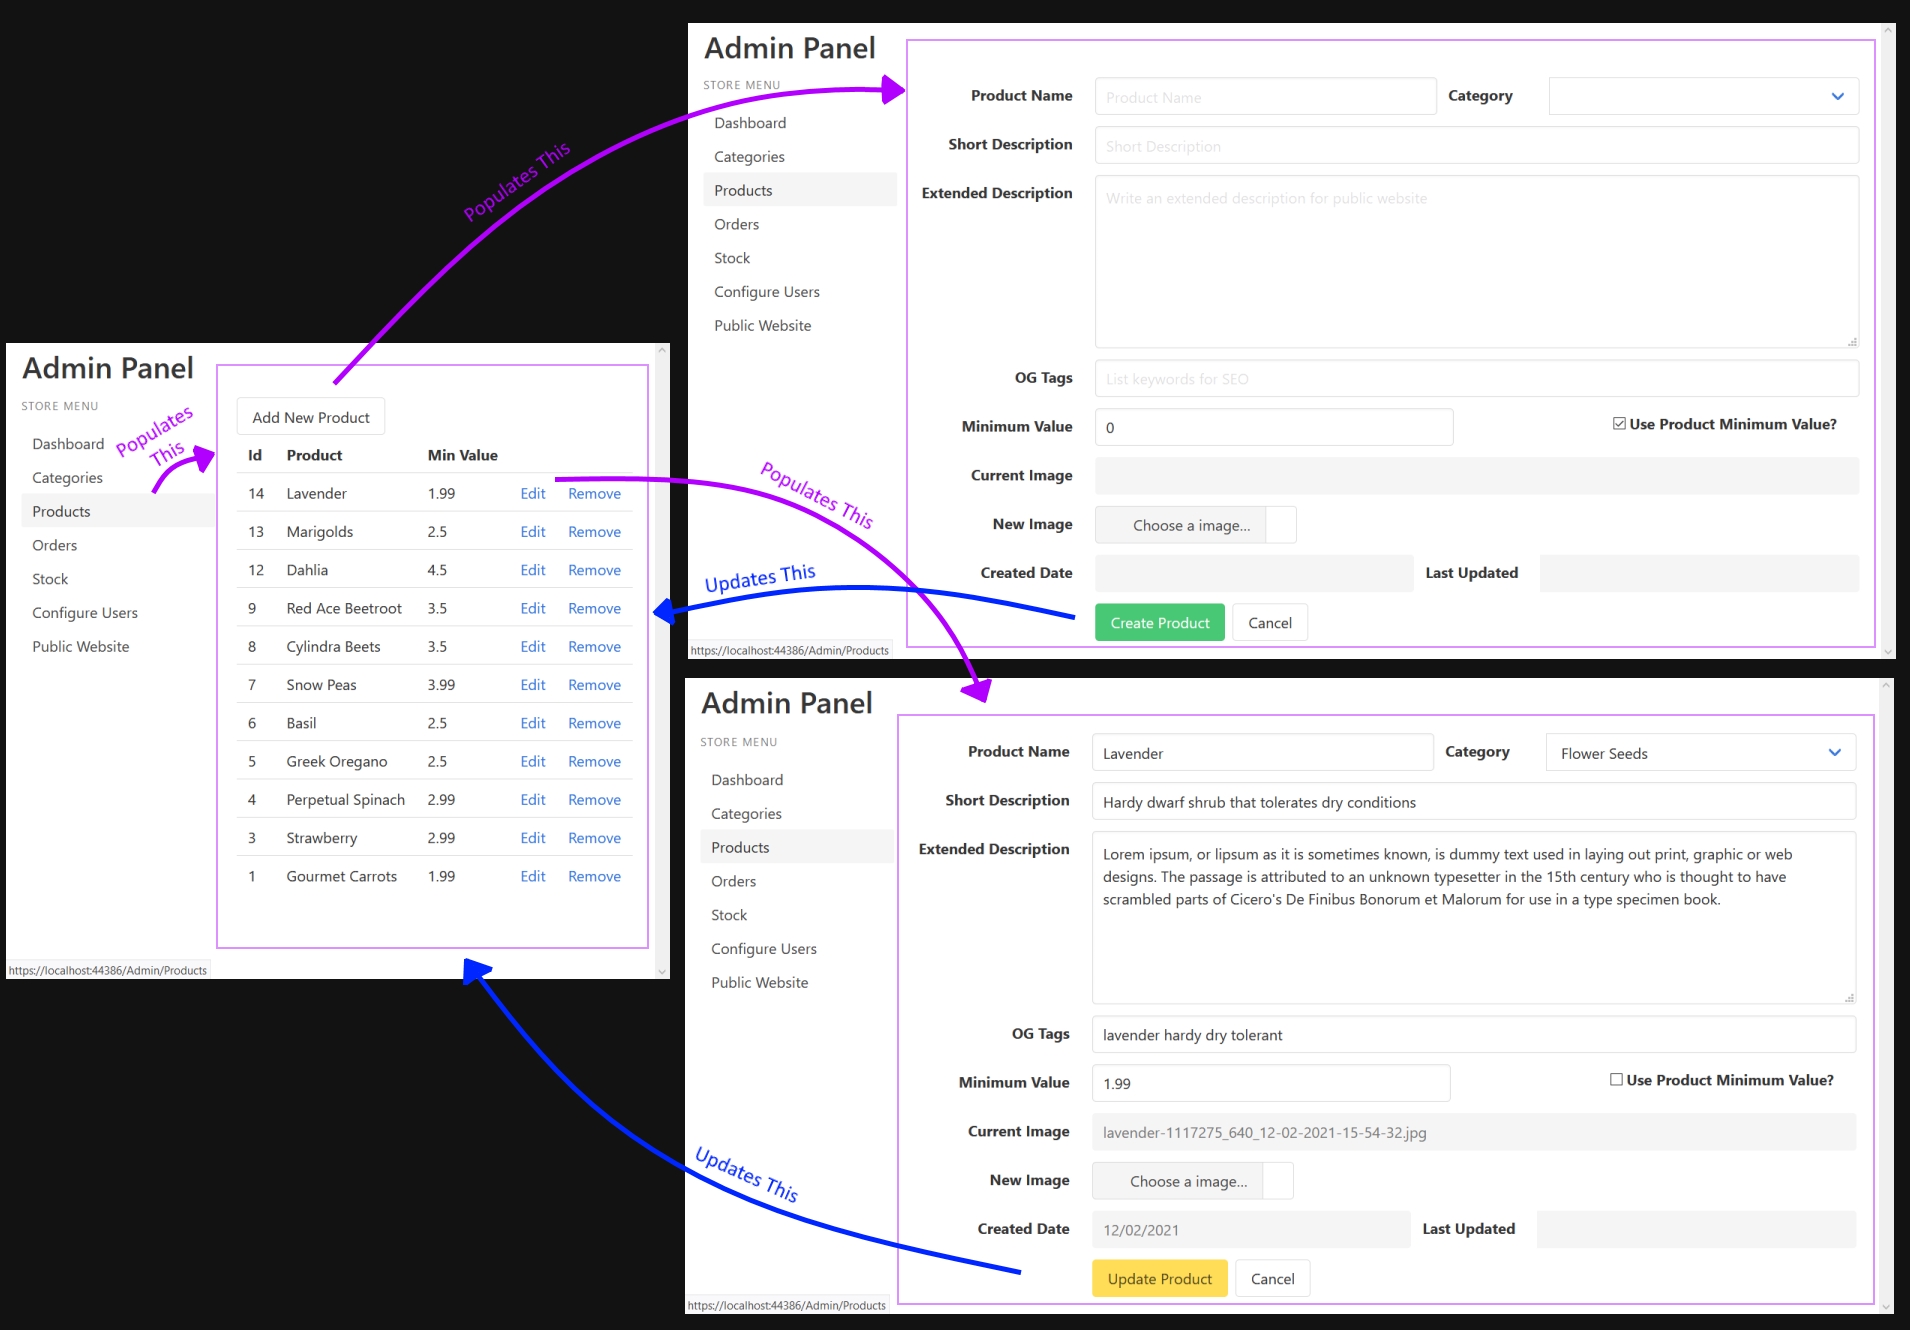 The admin product page showing the different views based on the action